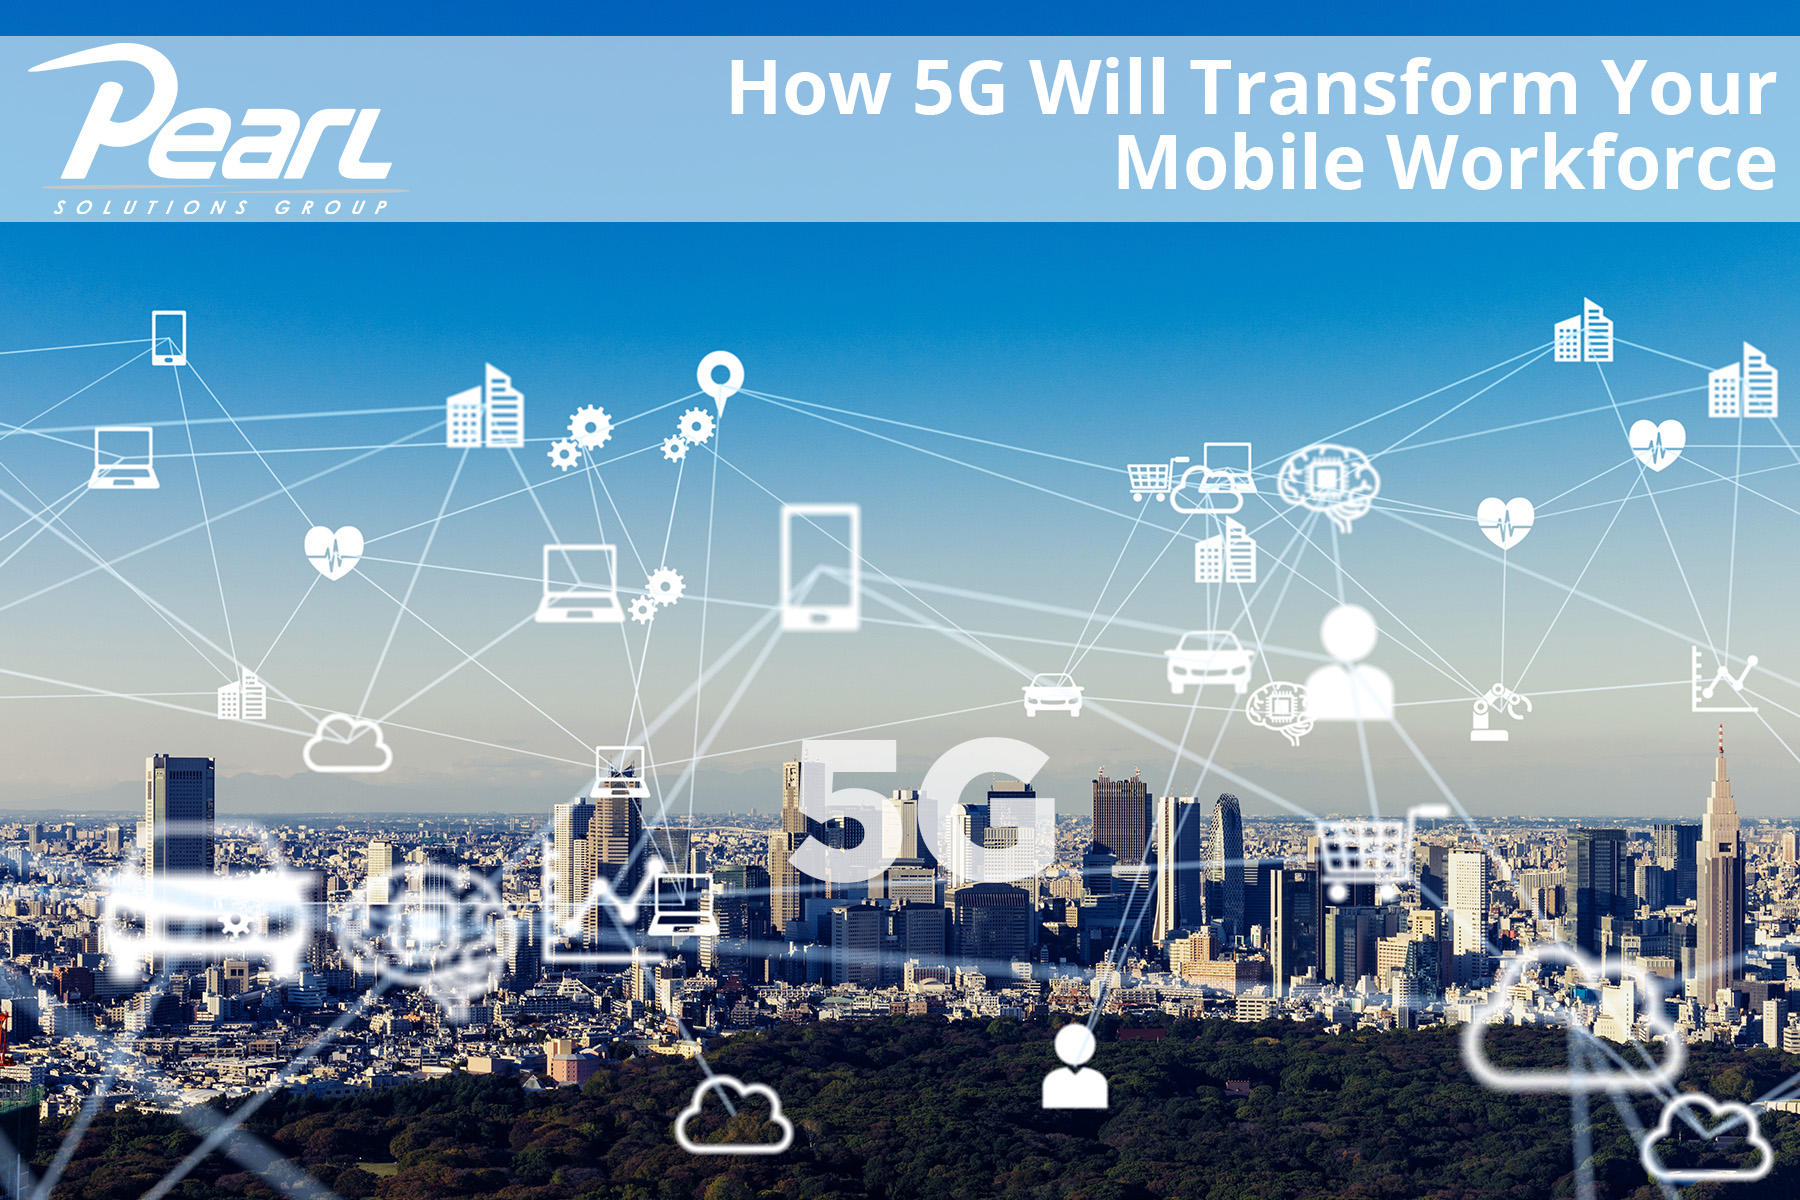 How 5G will transform your mobile workforce